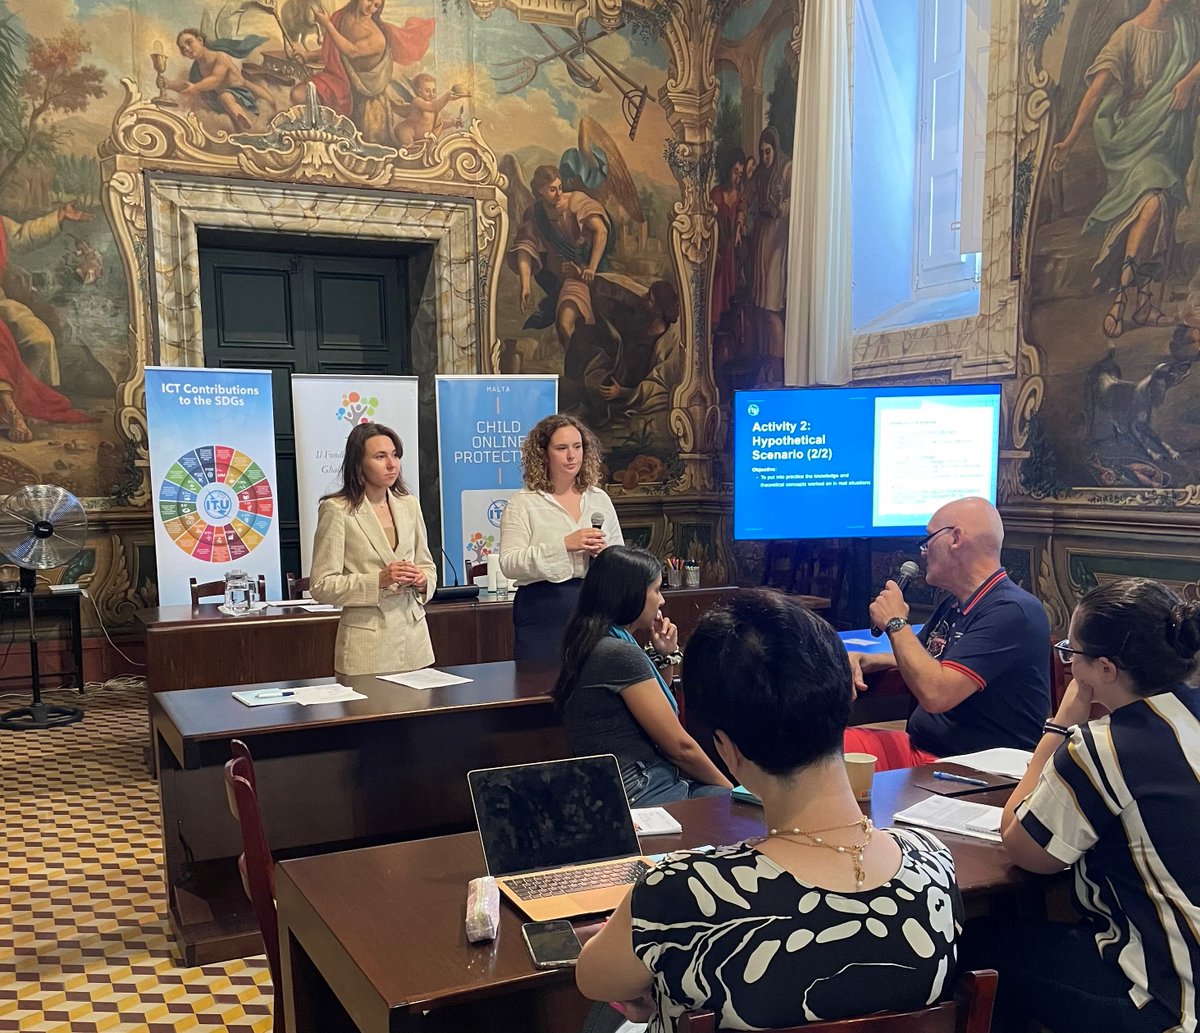 Today, @ITUEurope's team started the onsite Training of Trainers on #ChildOnlineProtection in #Malta targeting psychosocial teams of schools across the country with H.E @MarieLouise_MT and the team of @MFWSMalta.🧑‍💻 Learn more about this initiative▶️bit.ly/3pcvgRX